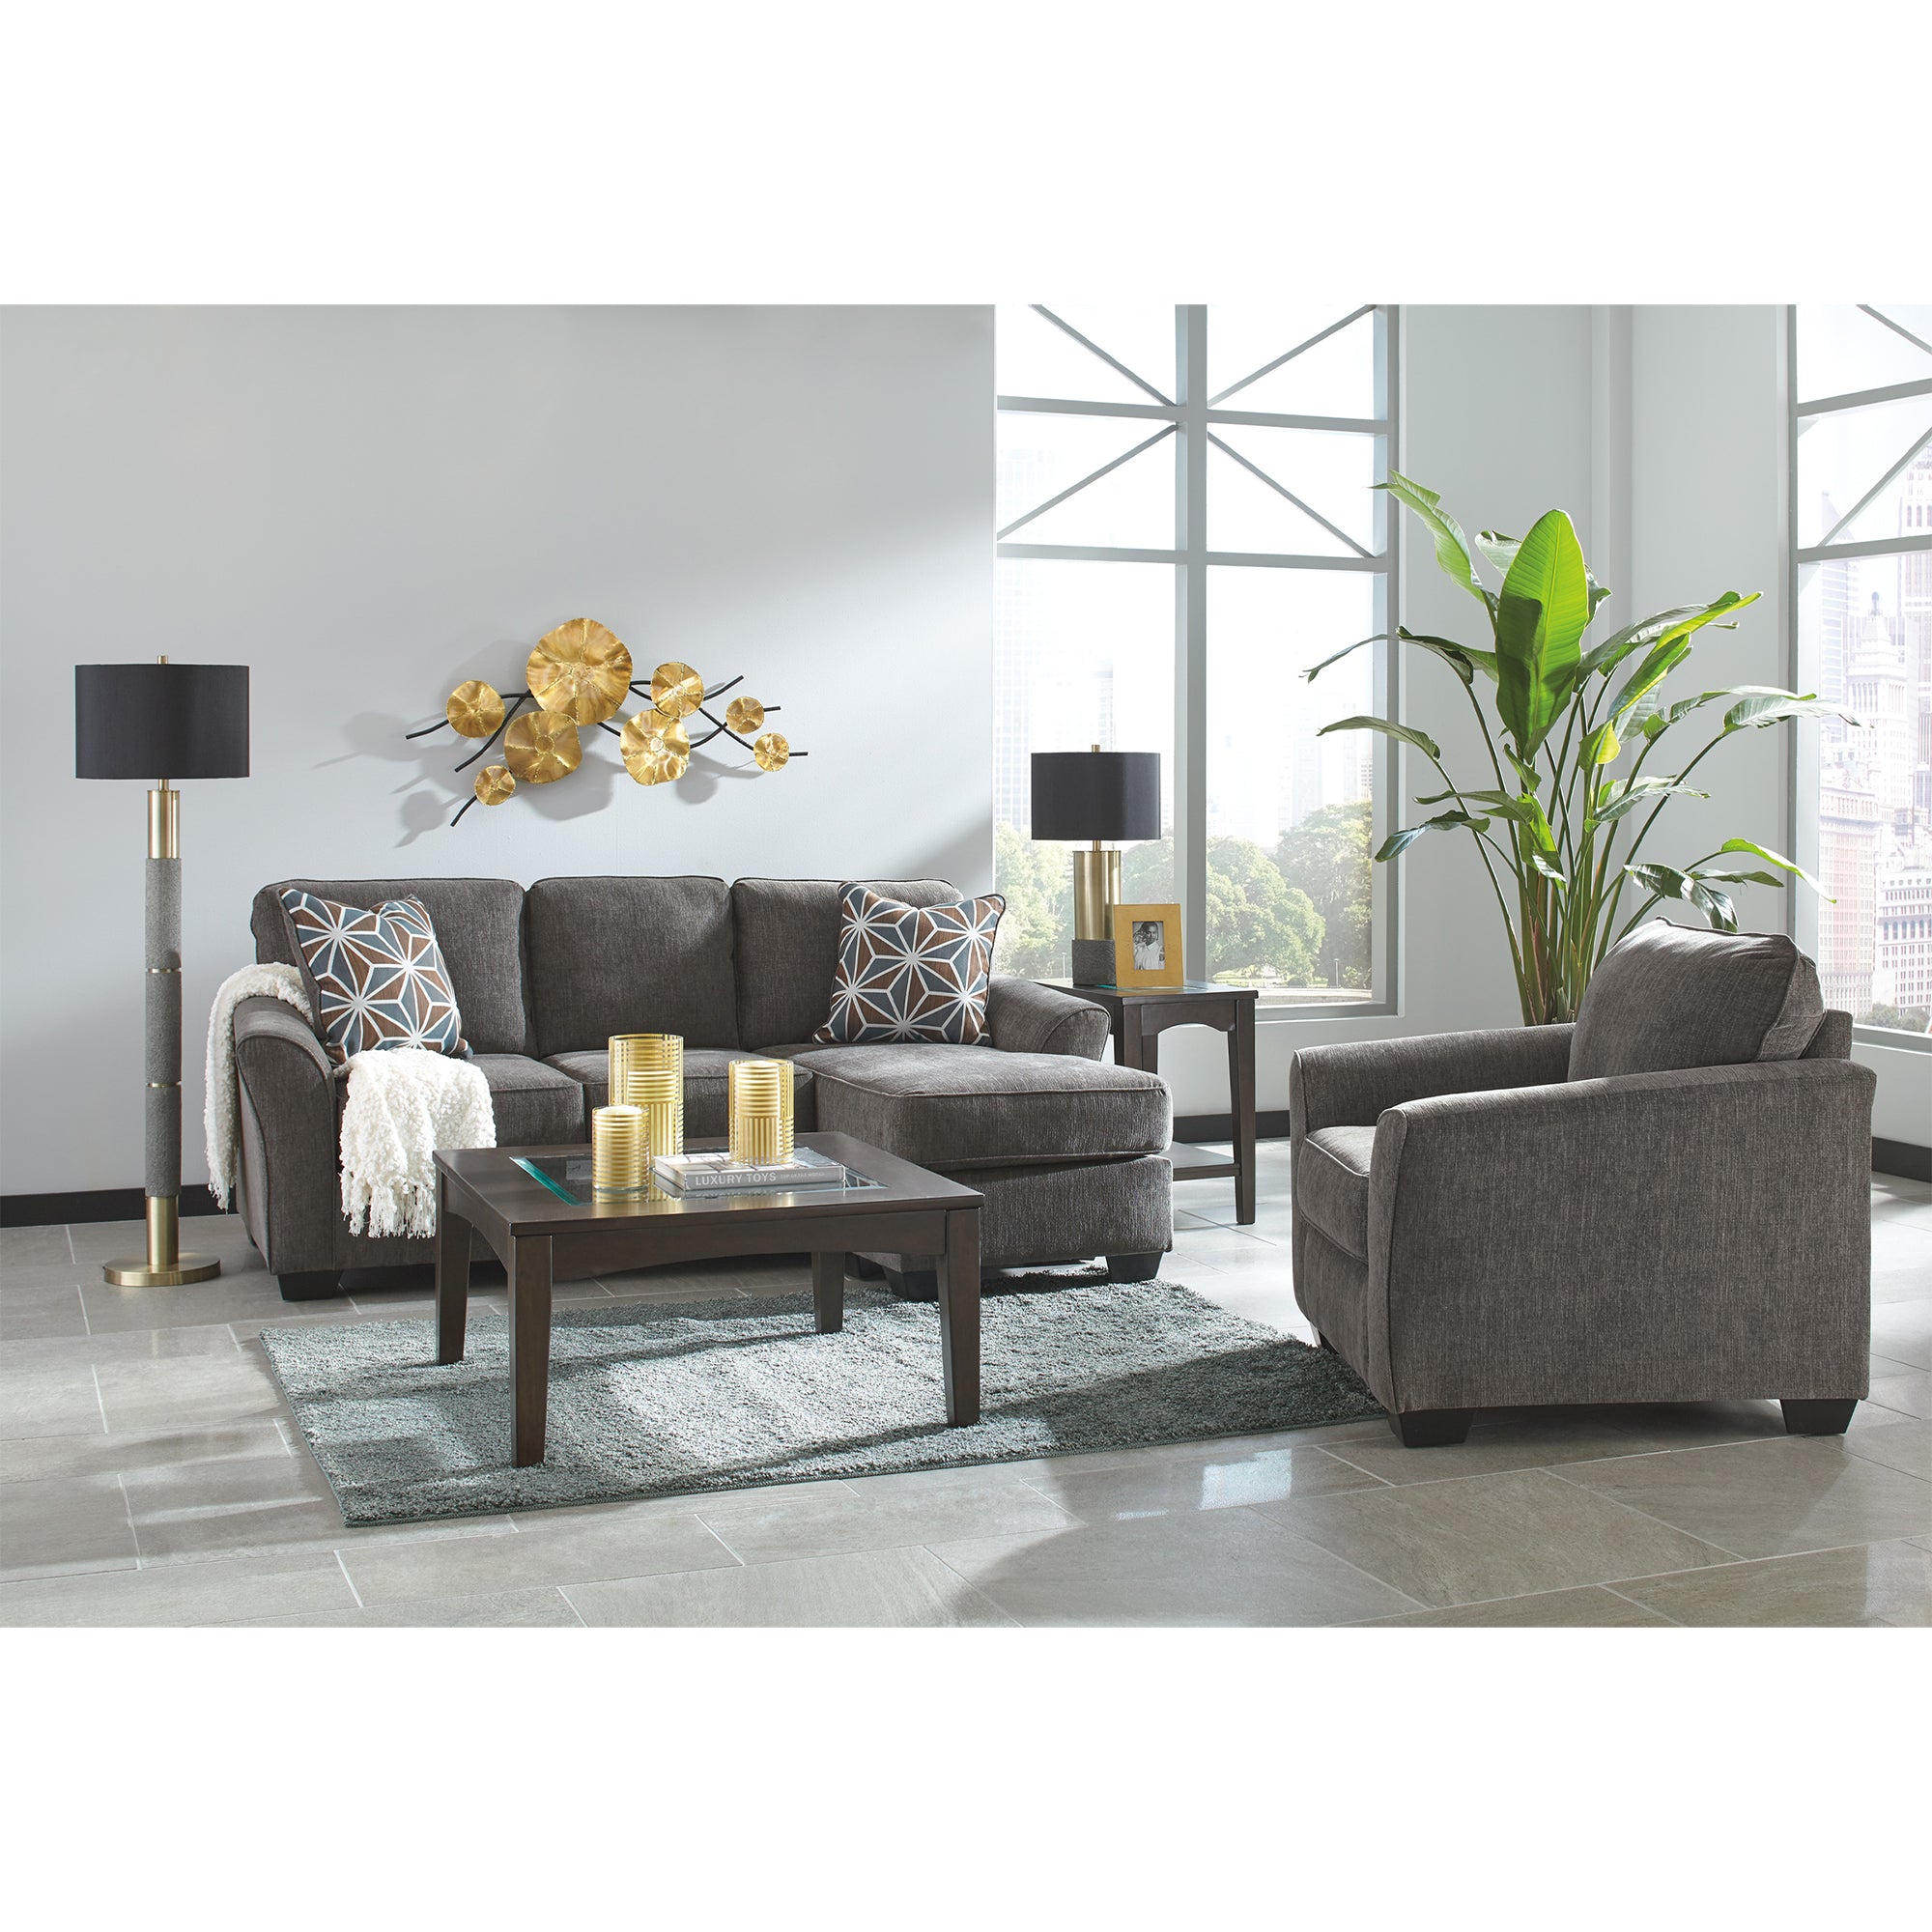 Brise Sofa Chaise and Chair in Slate Color